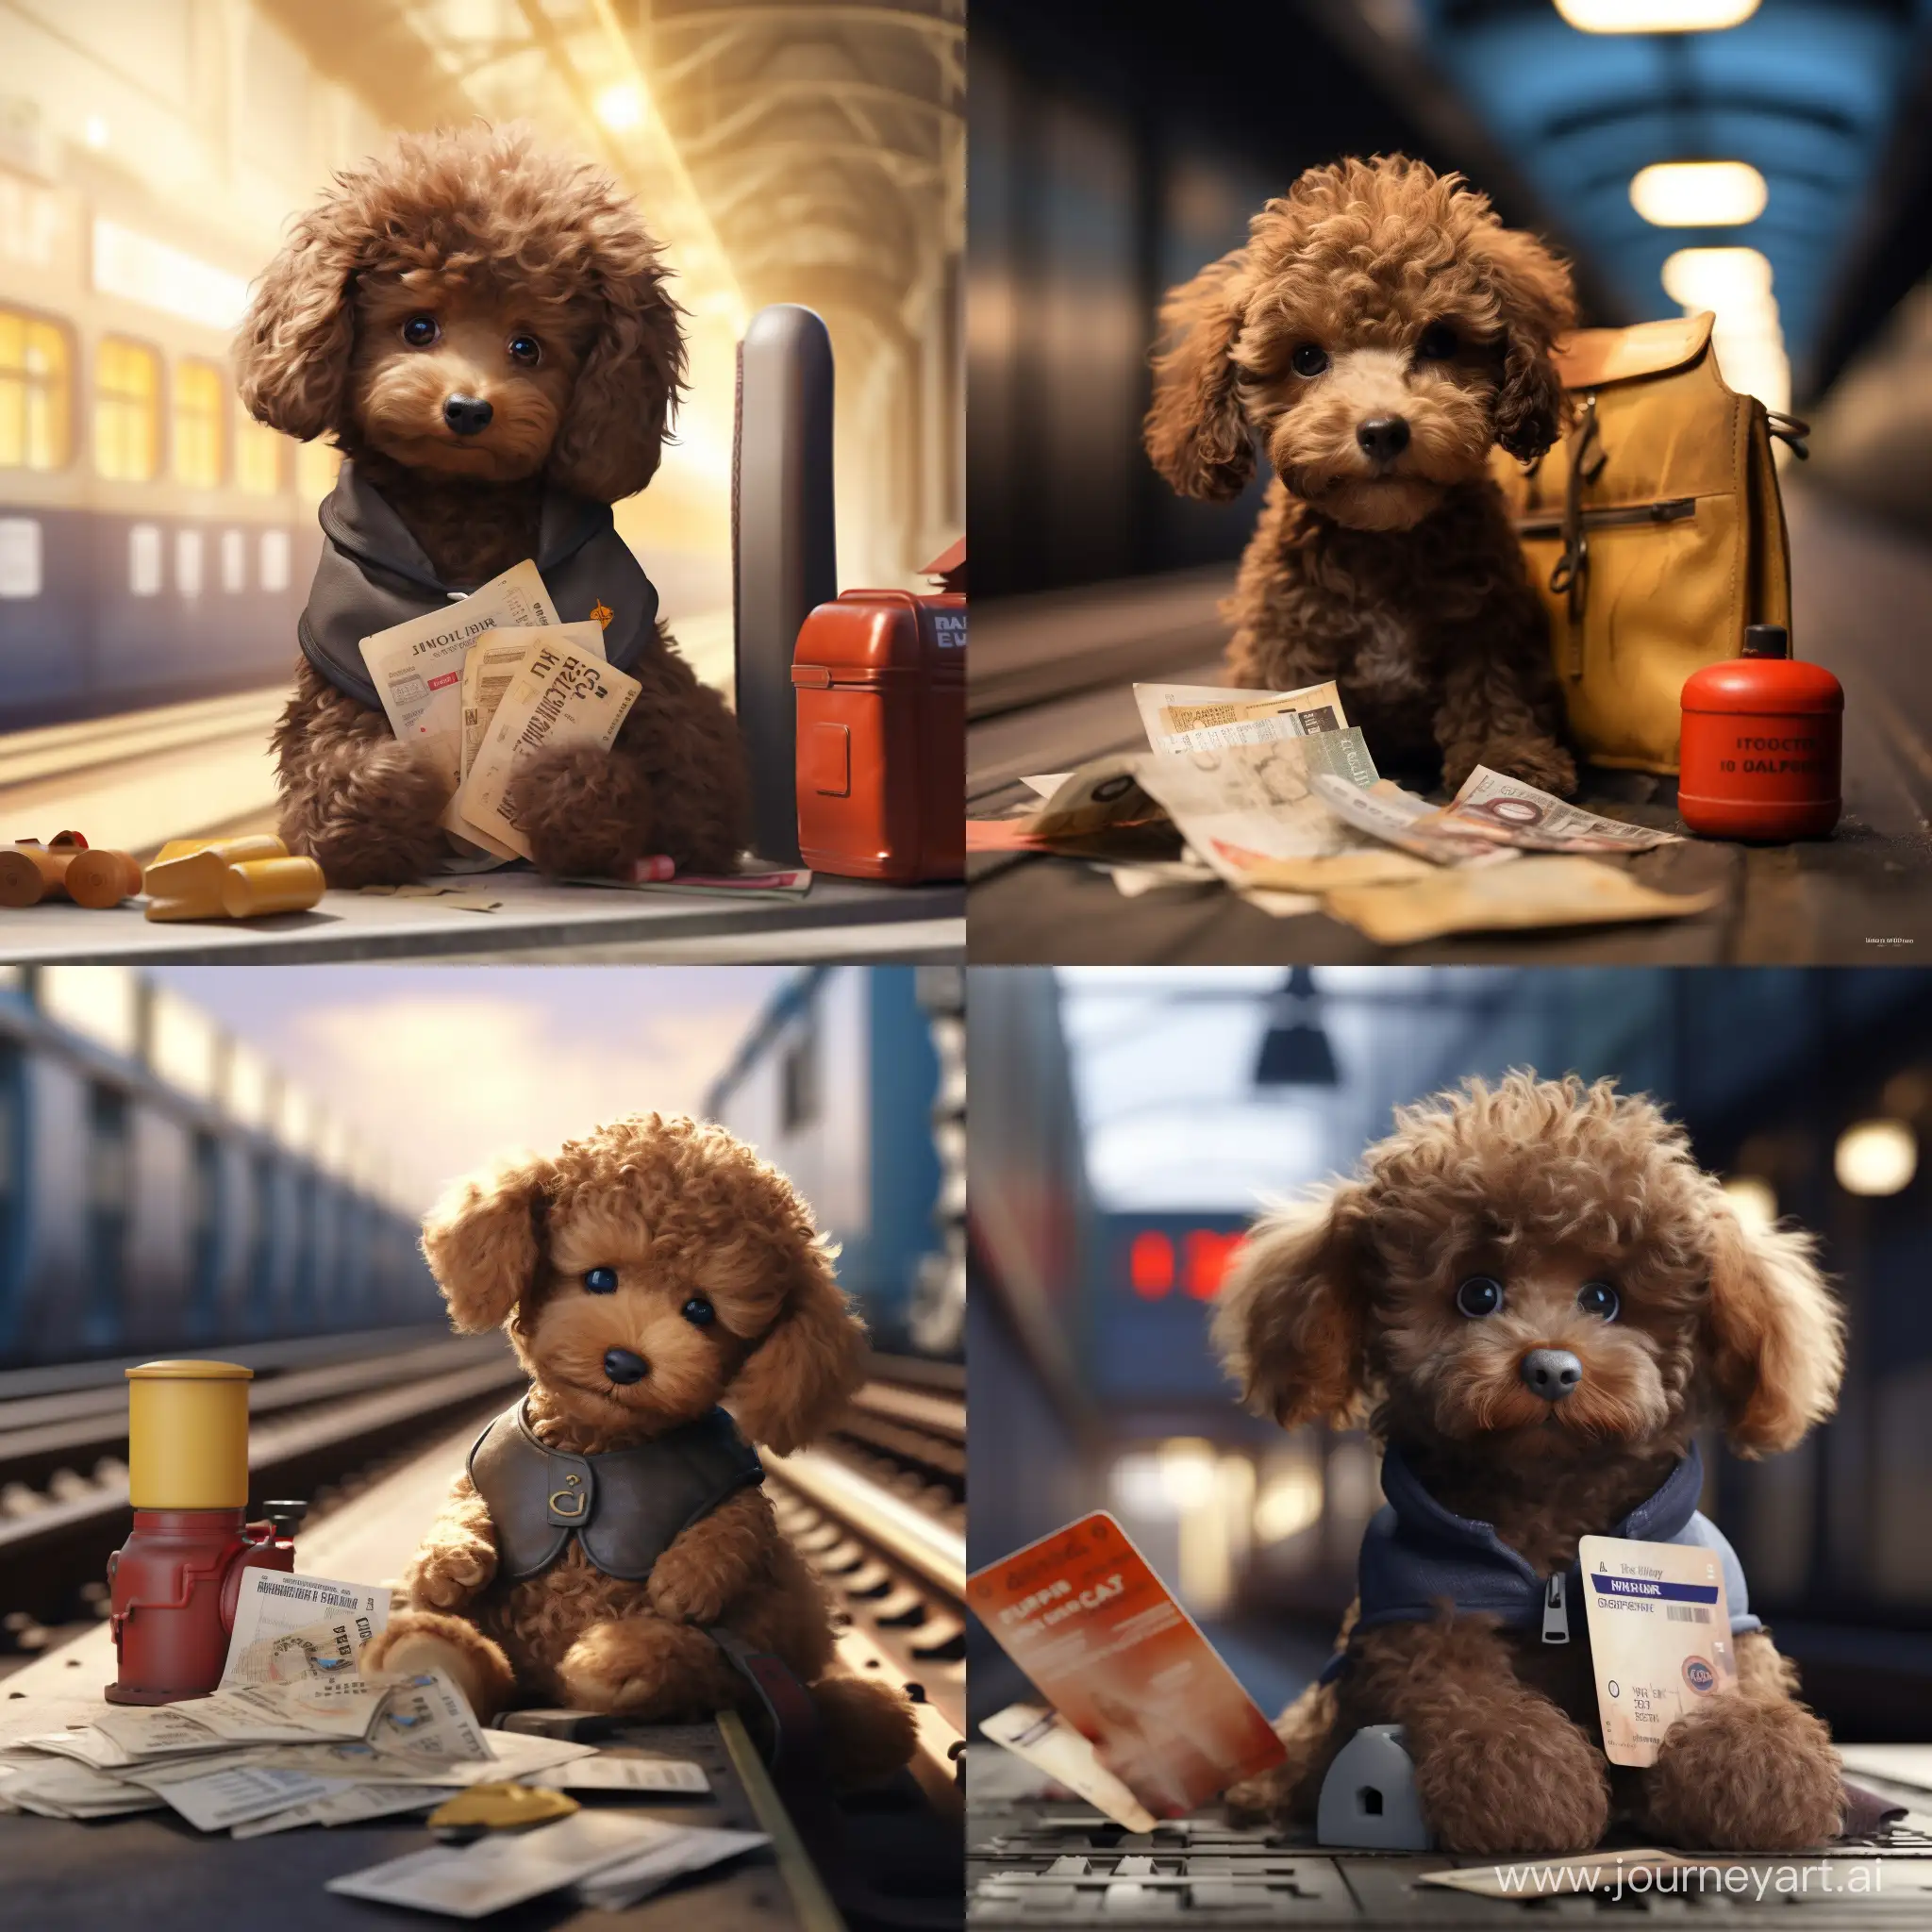 A small chocolate-colored Toy Poodle puppy is holding a train ticket in its teeth while sitting at a big city train station and looking sad